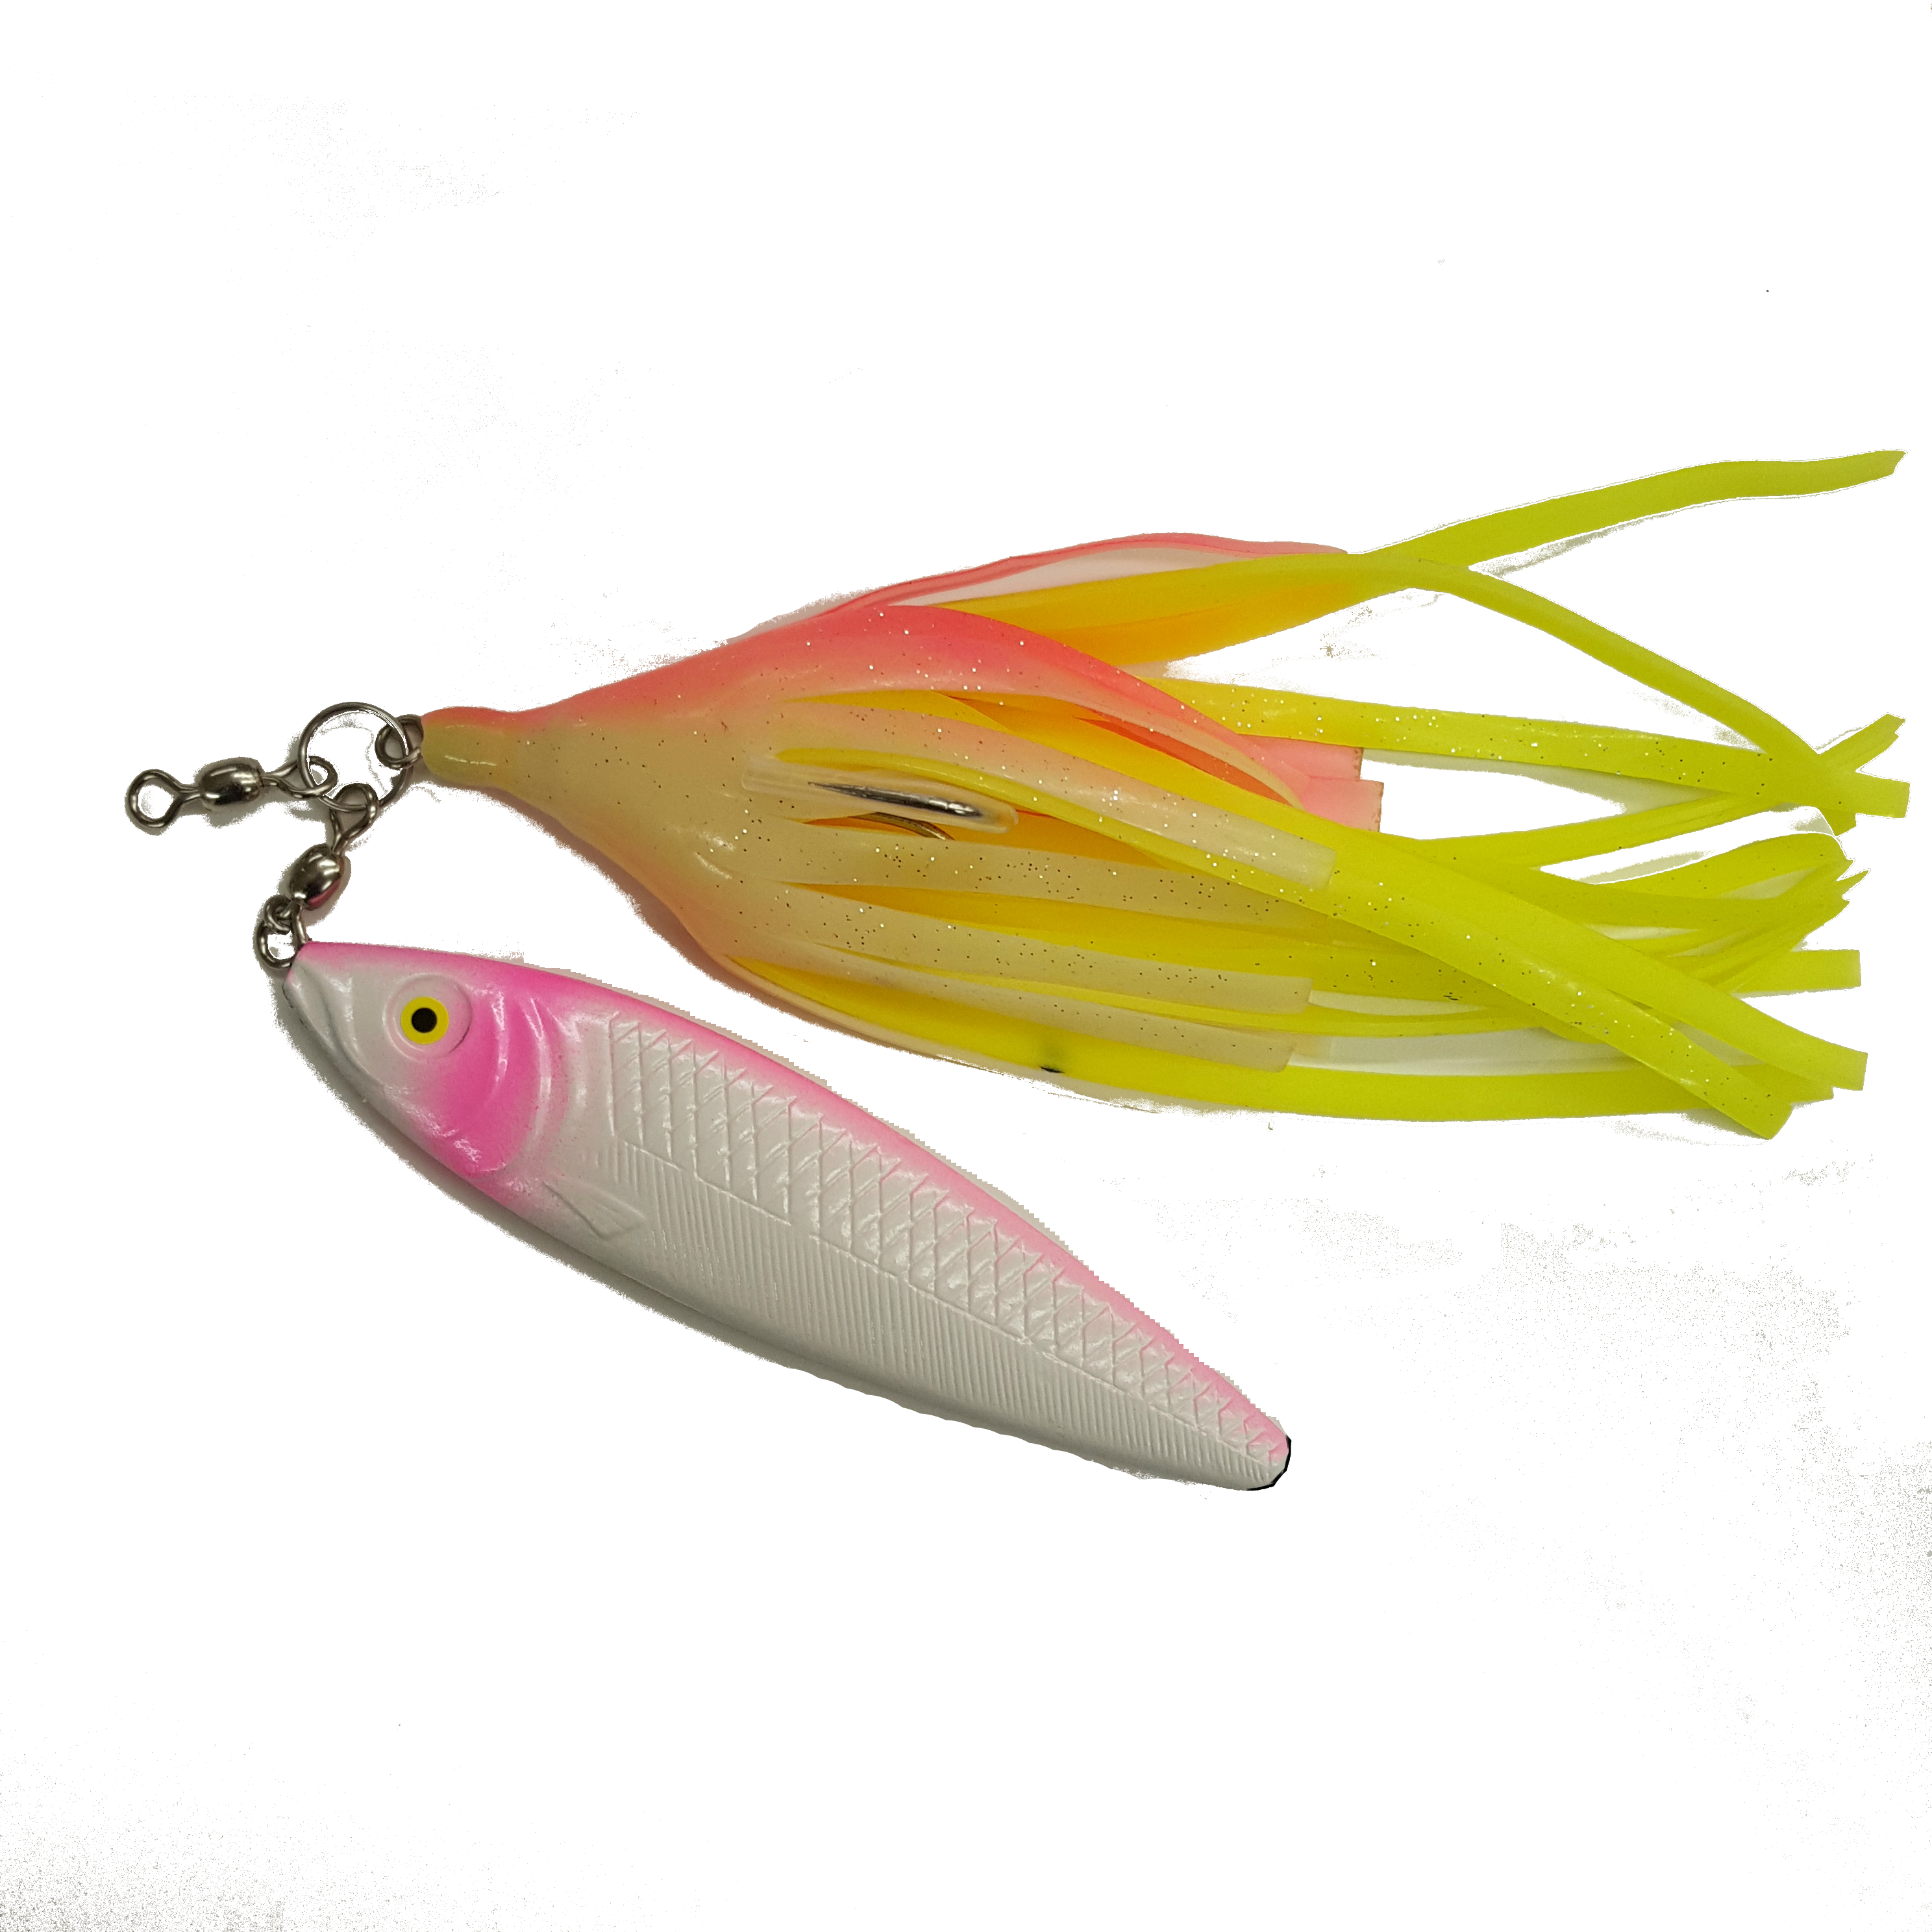 https://www.buzzbombtackle.com/wp-content/uploads/2018/06/PInk-Pearl-Halibut-Spinnow.png